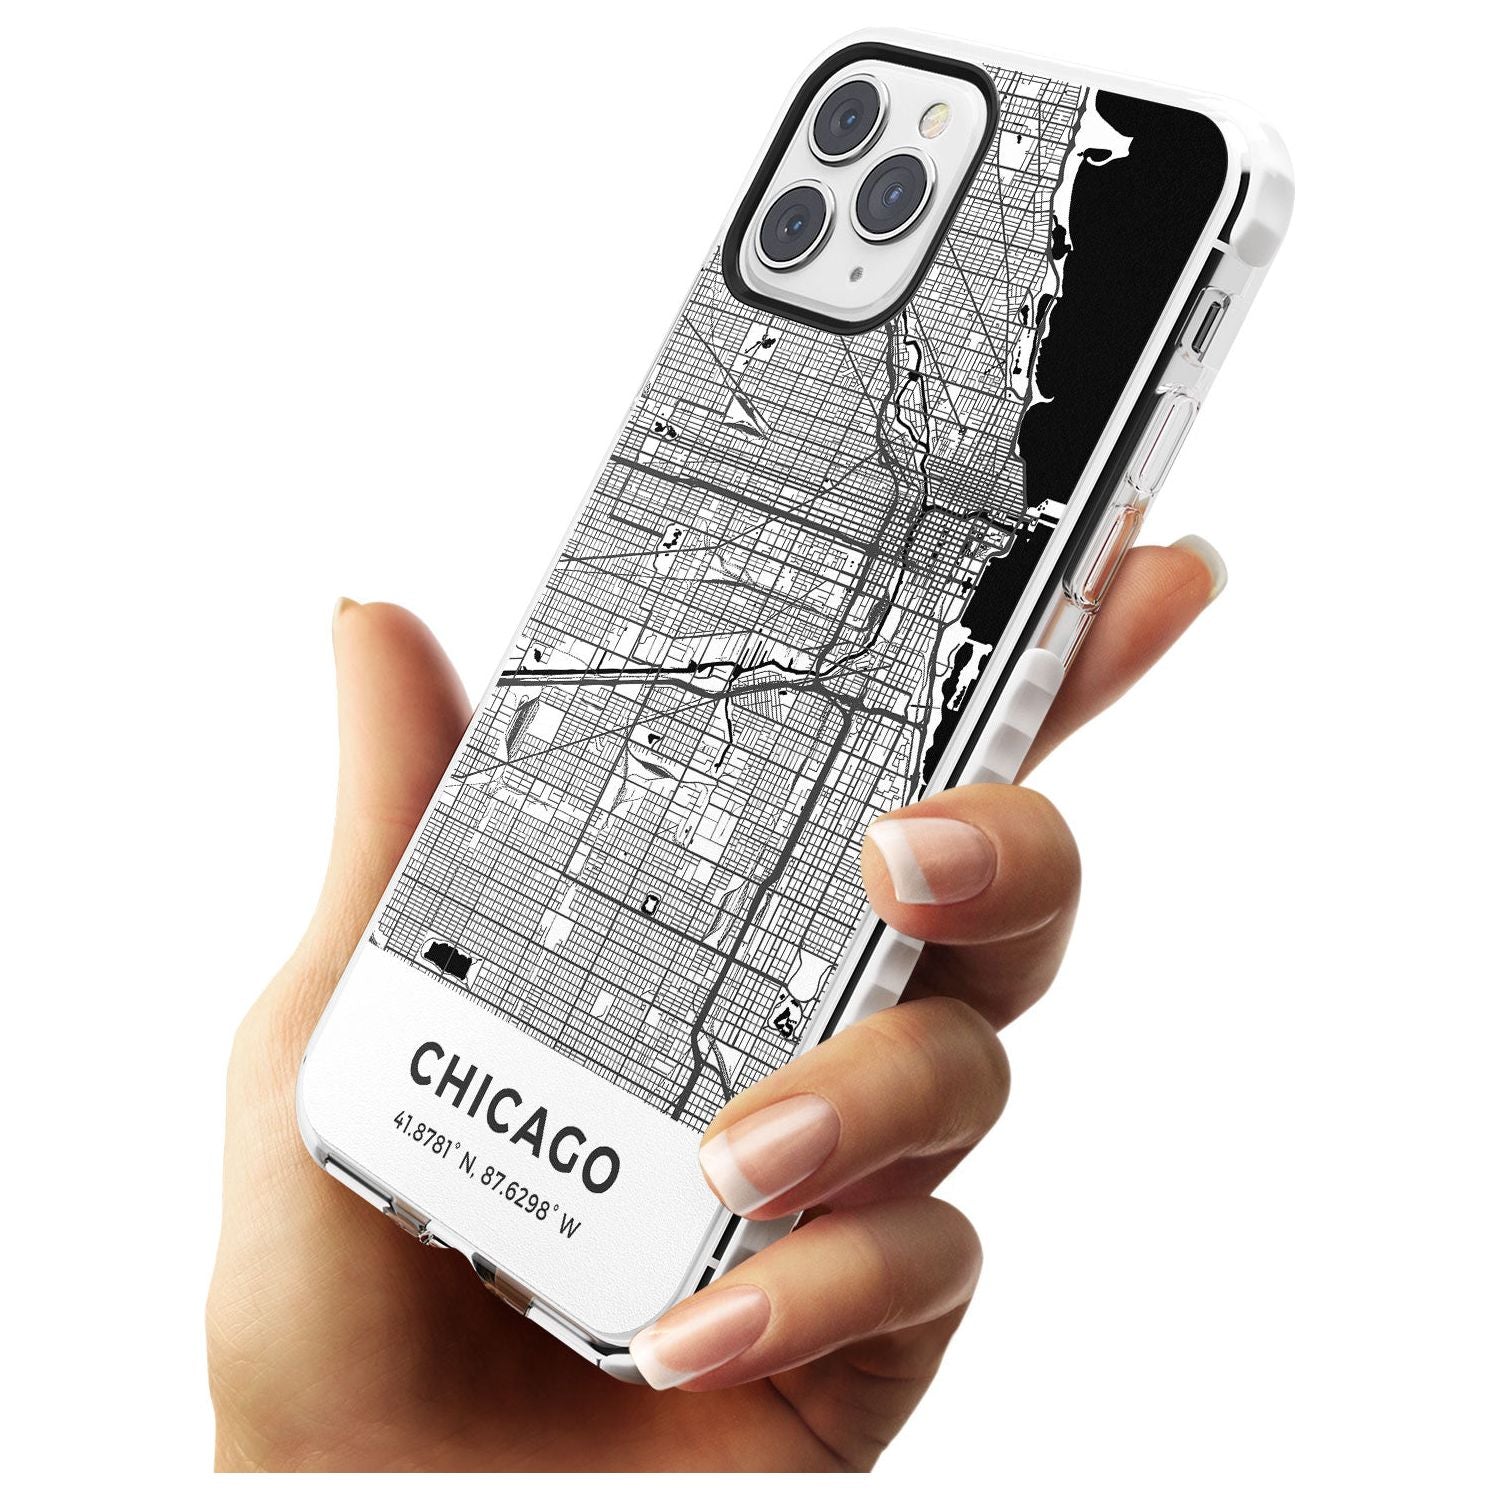 Map of Chicago, Illinois Impact Phone Case for iPhone 11 Pro Max